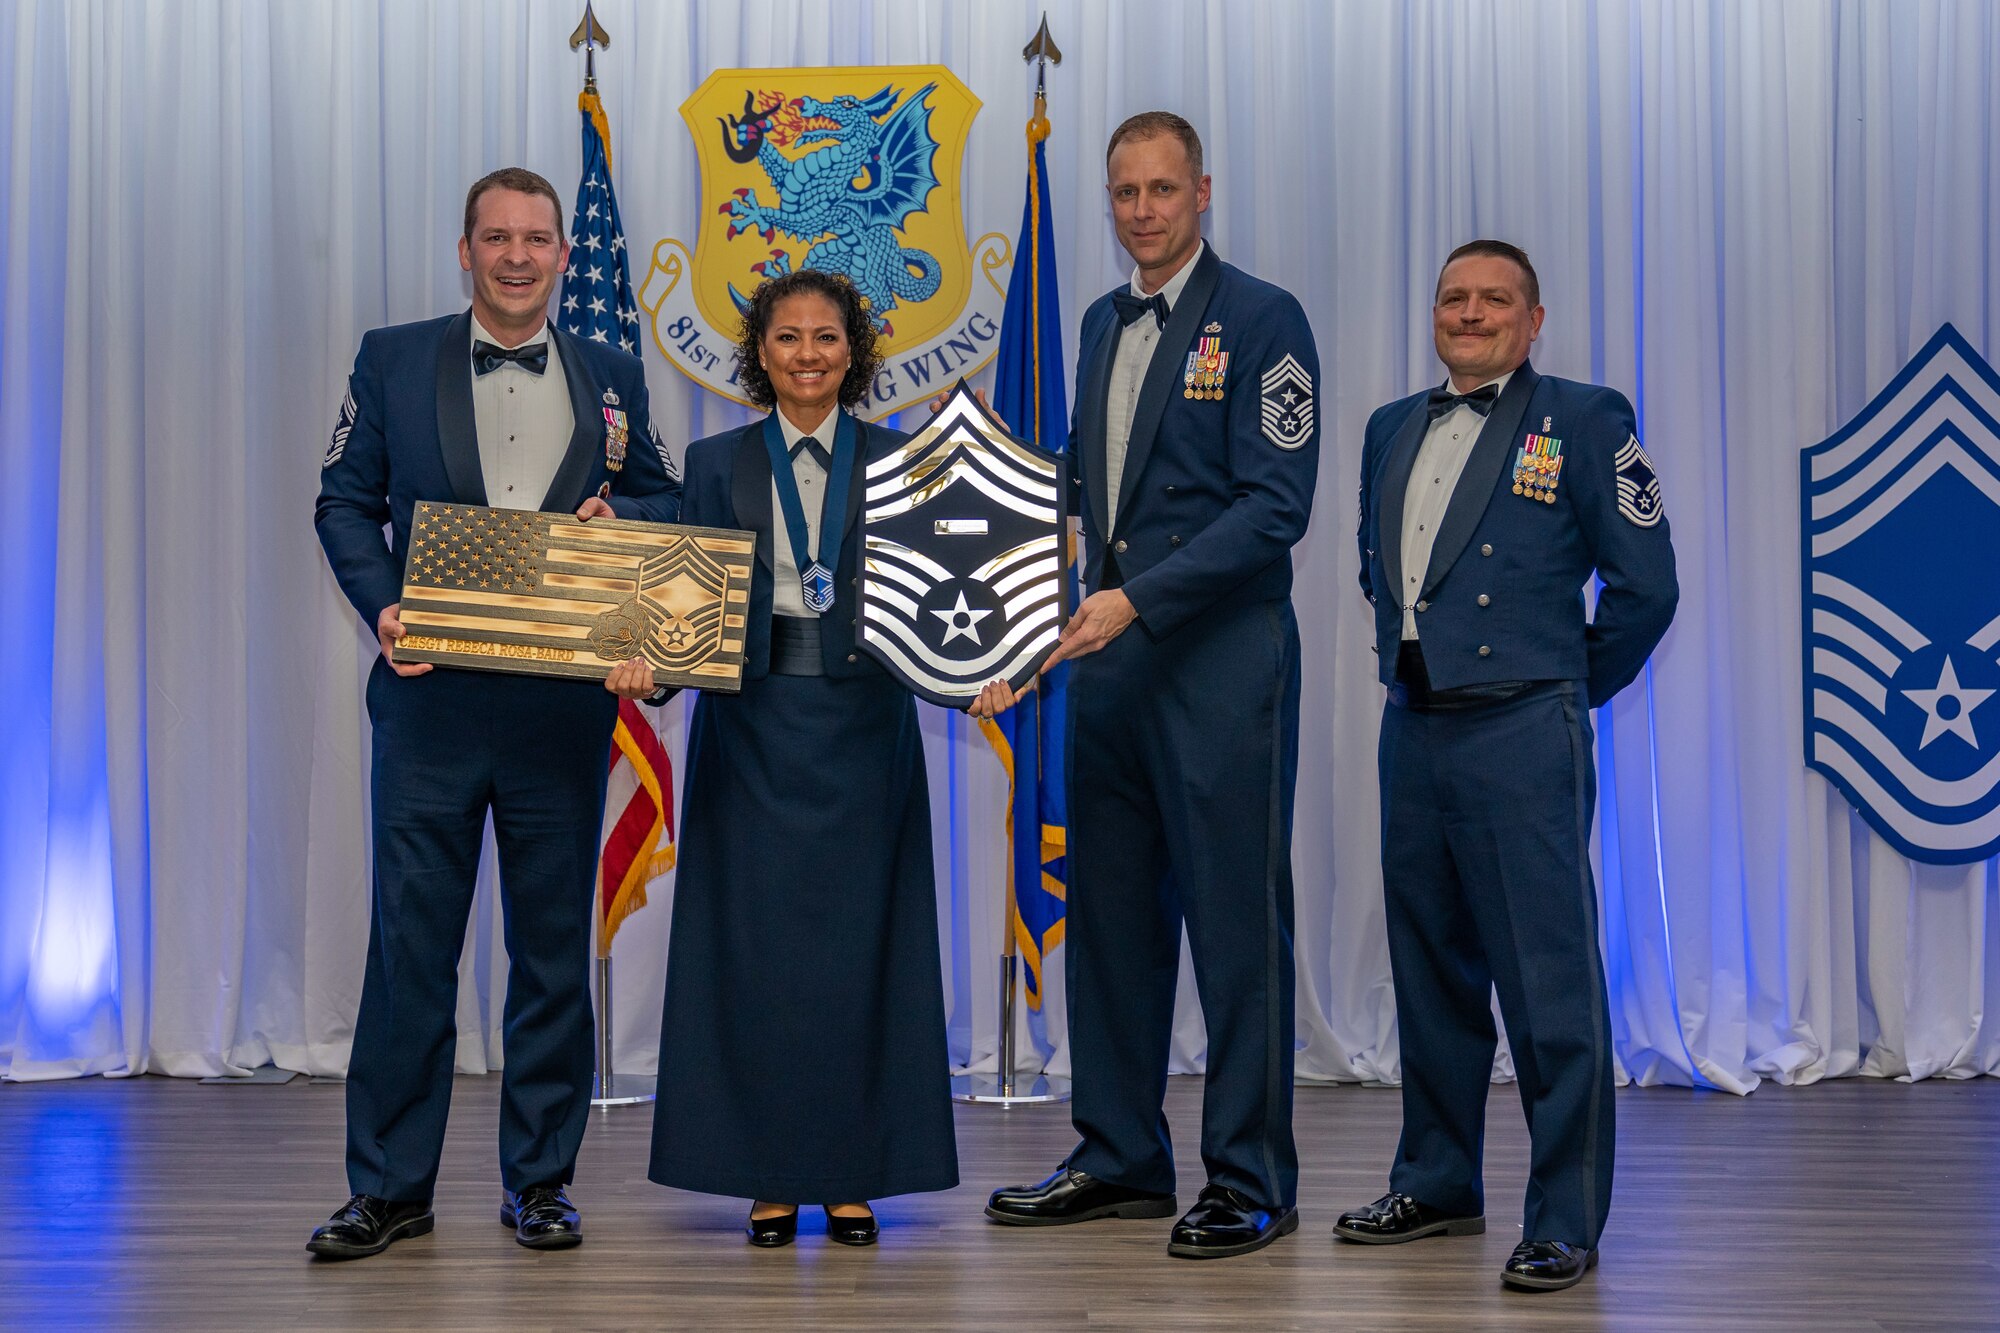 U.S. Air Force Senior Master Sgt. Rebeca Rosa-Baird, 81st Comptroller Squadron senior enlisted leader, receives two plaques in recognition of attaining chief master sergeant during the Chief Master Sergeant Recognition Ceremony at Keesler Air Force Base, Mississippi, March 15, 2024. Two Keesler Airmen earned their chief master sergeant stripe during the 2023 promotion release. Chief master sergeants make up 1% of the Air Force enlisted force. (U.S. Air Force photo by Andrew Young)